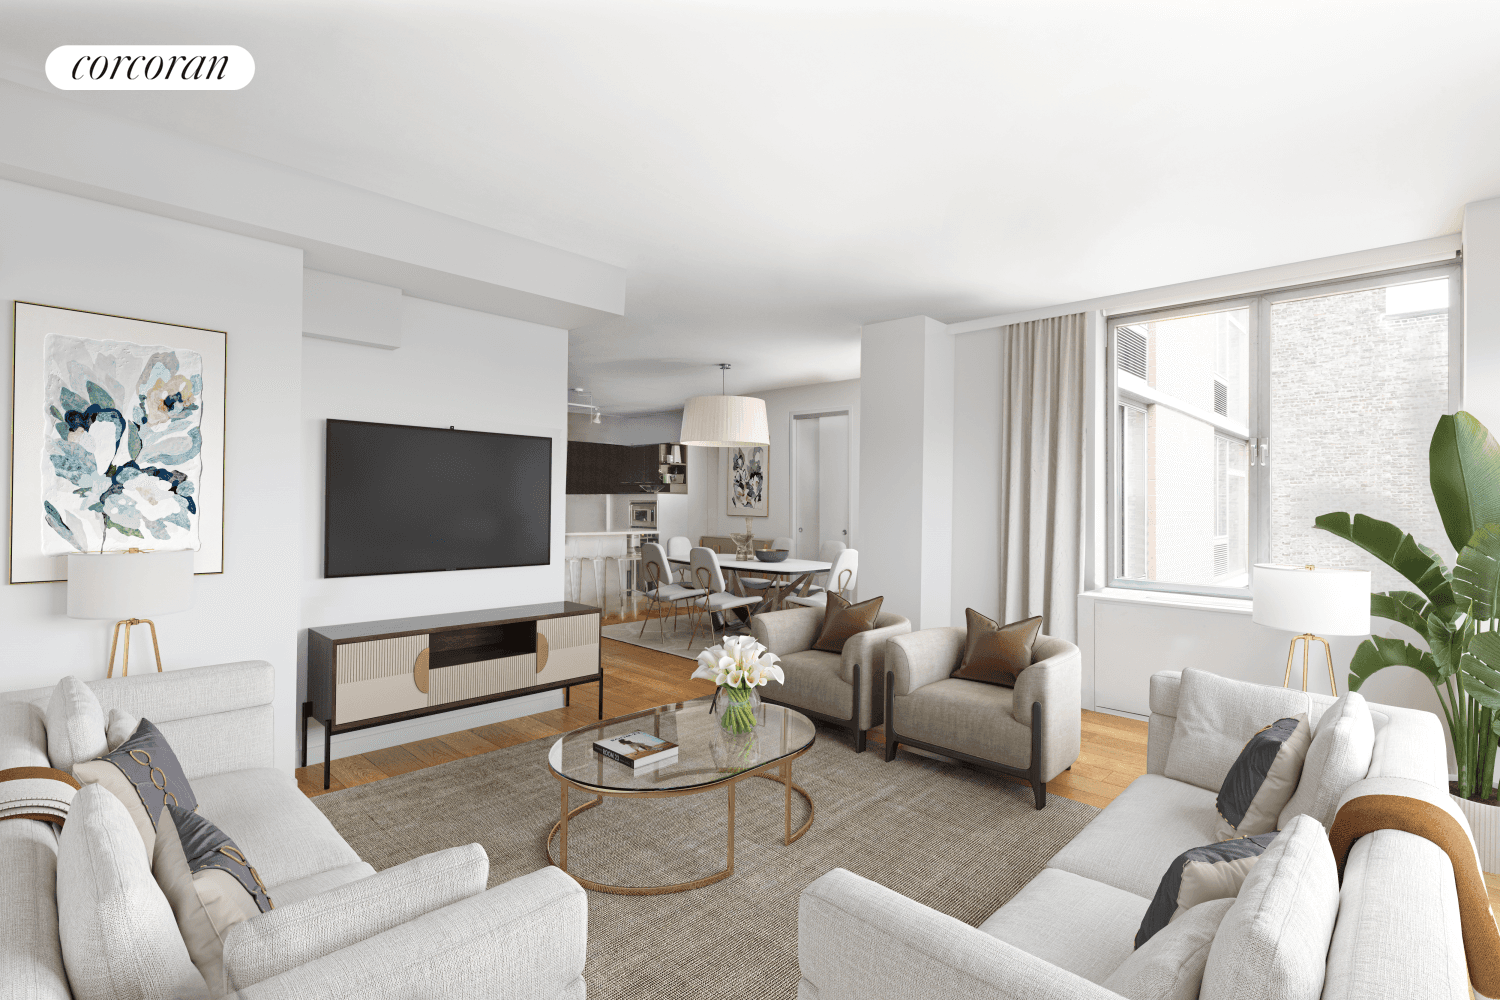 Convertible Three Bedroom Premium finishes and stunning loft like proportions await in this gorgeous two bedroom, two bathroom residence in a revered full service Chelsea condominium.